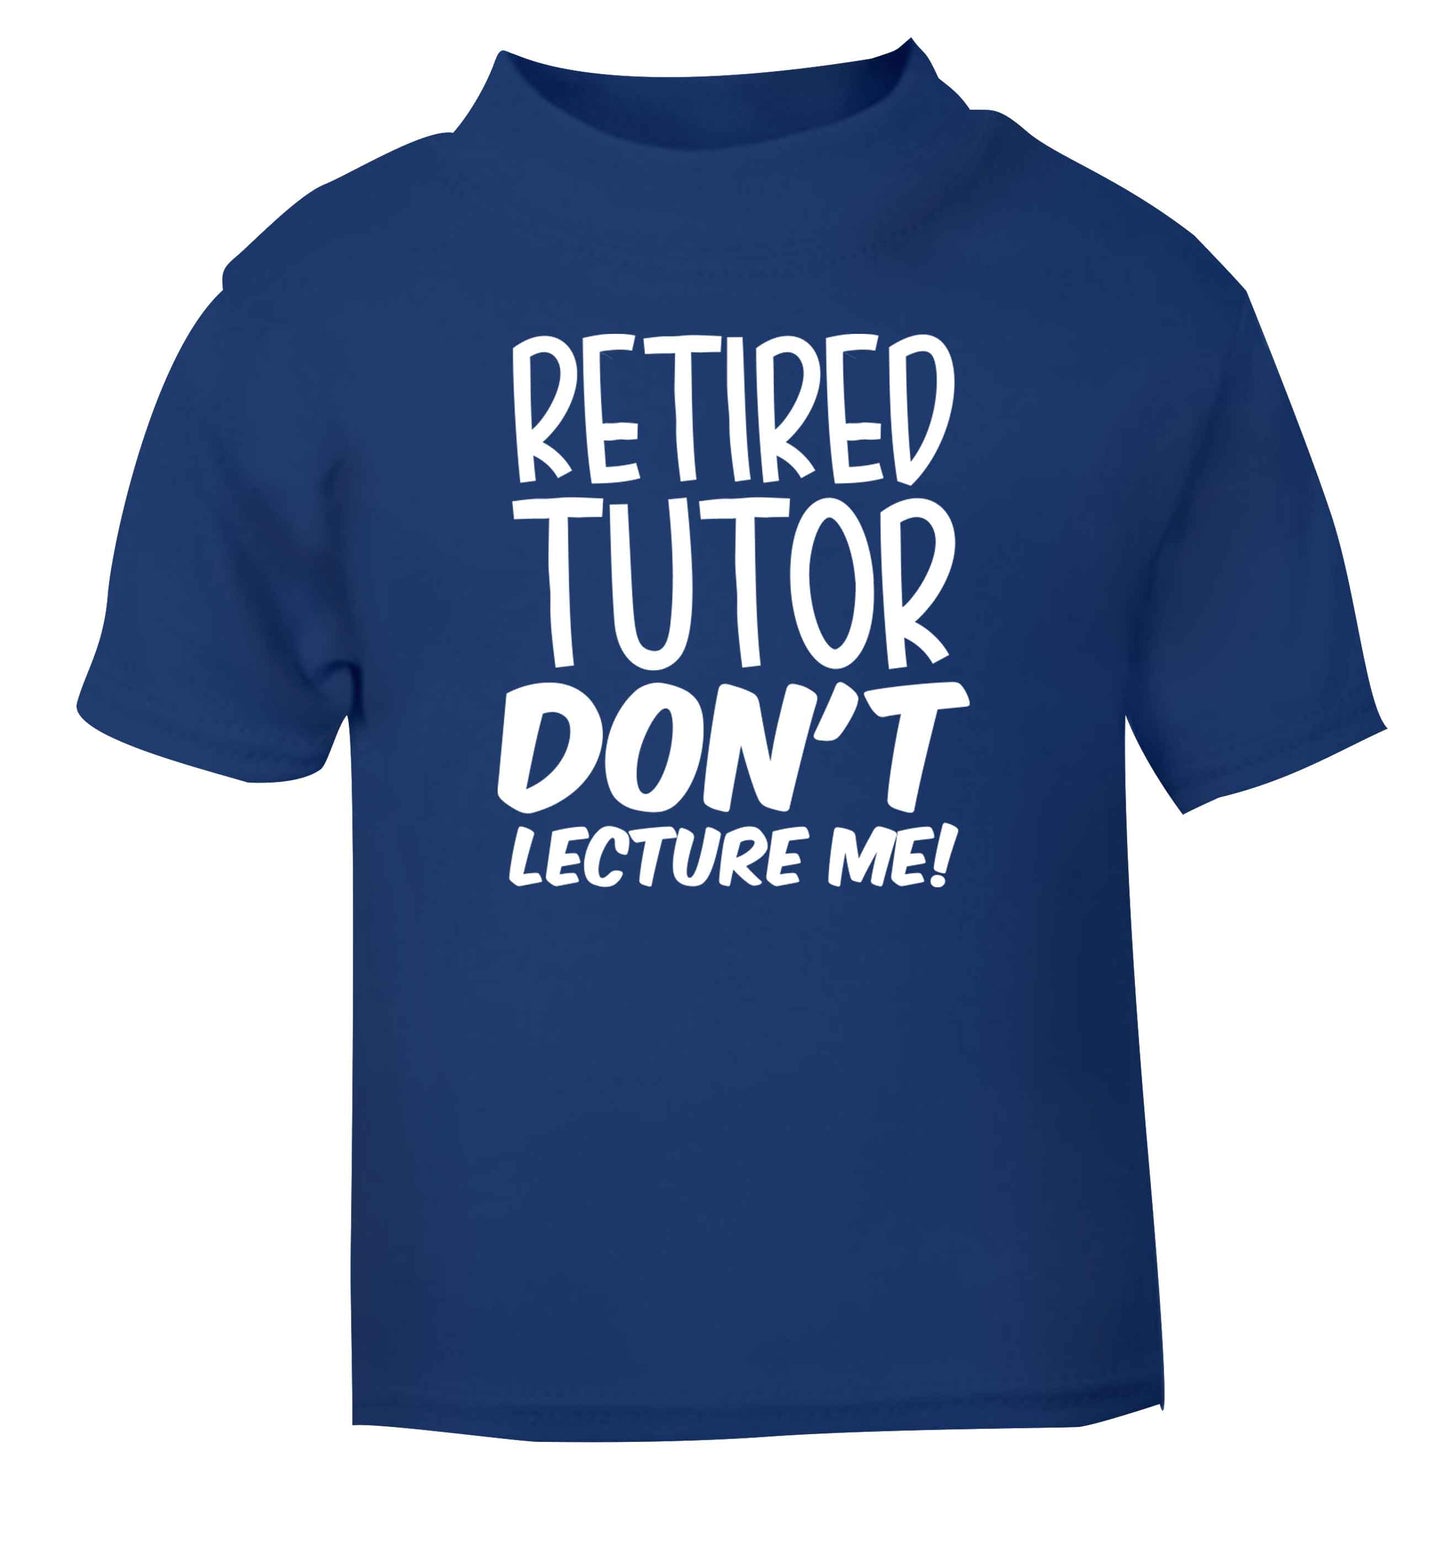 Retired tutor don't lecture me! blue Baby Toddler Tshirt 2 Years